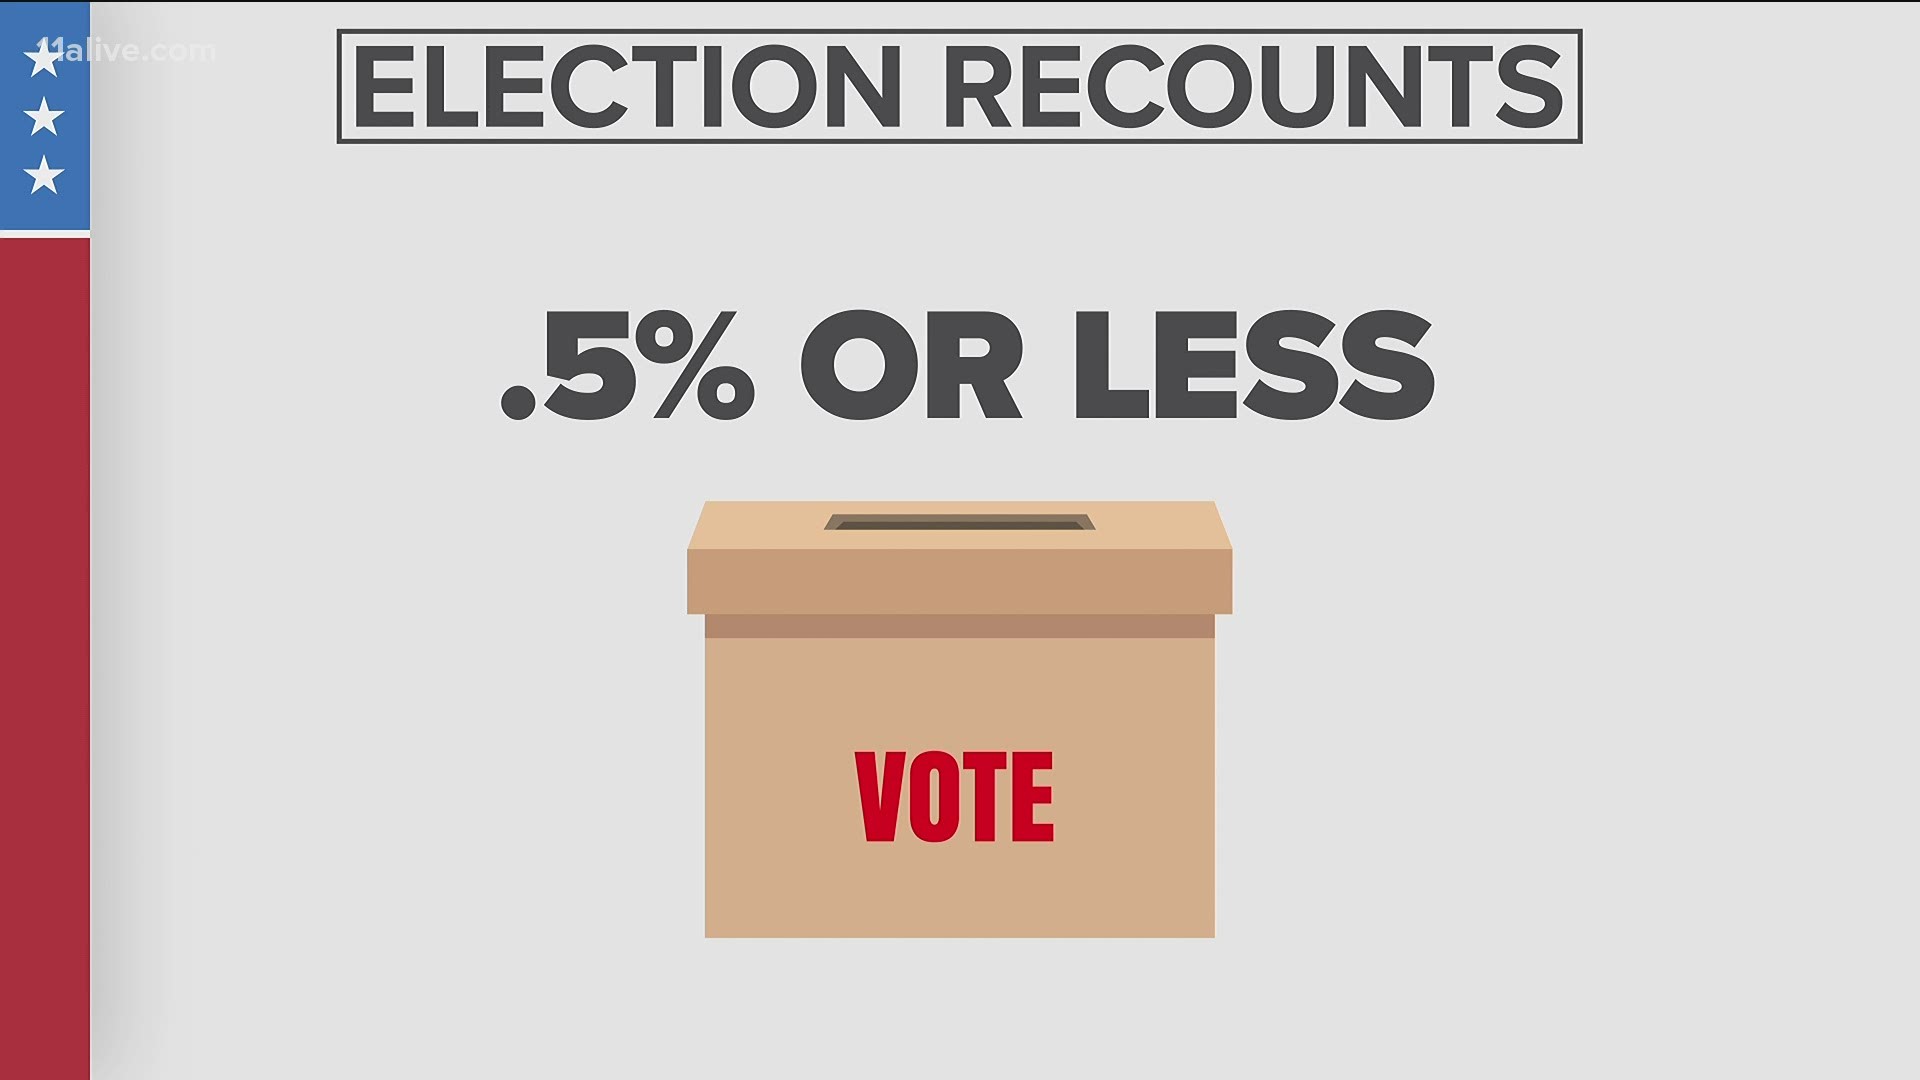 Under Georgia law, a state race is eligible for a recount if the margin between the two candidates is less than 0.5%.